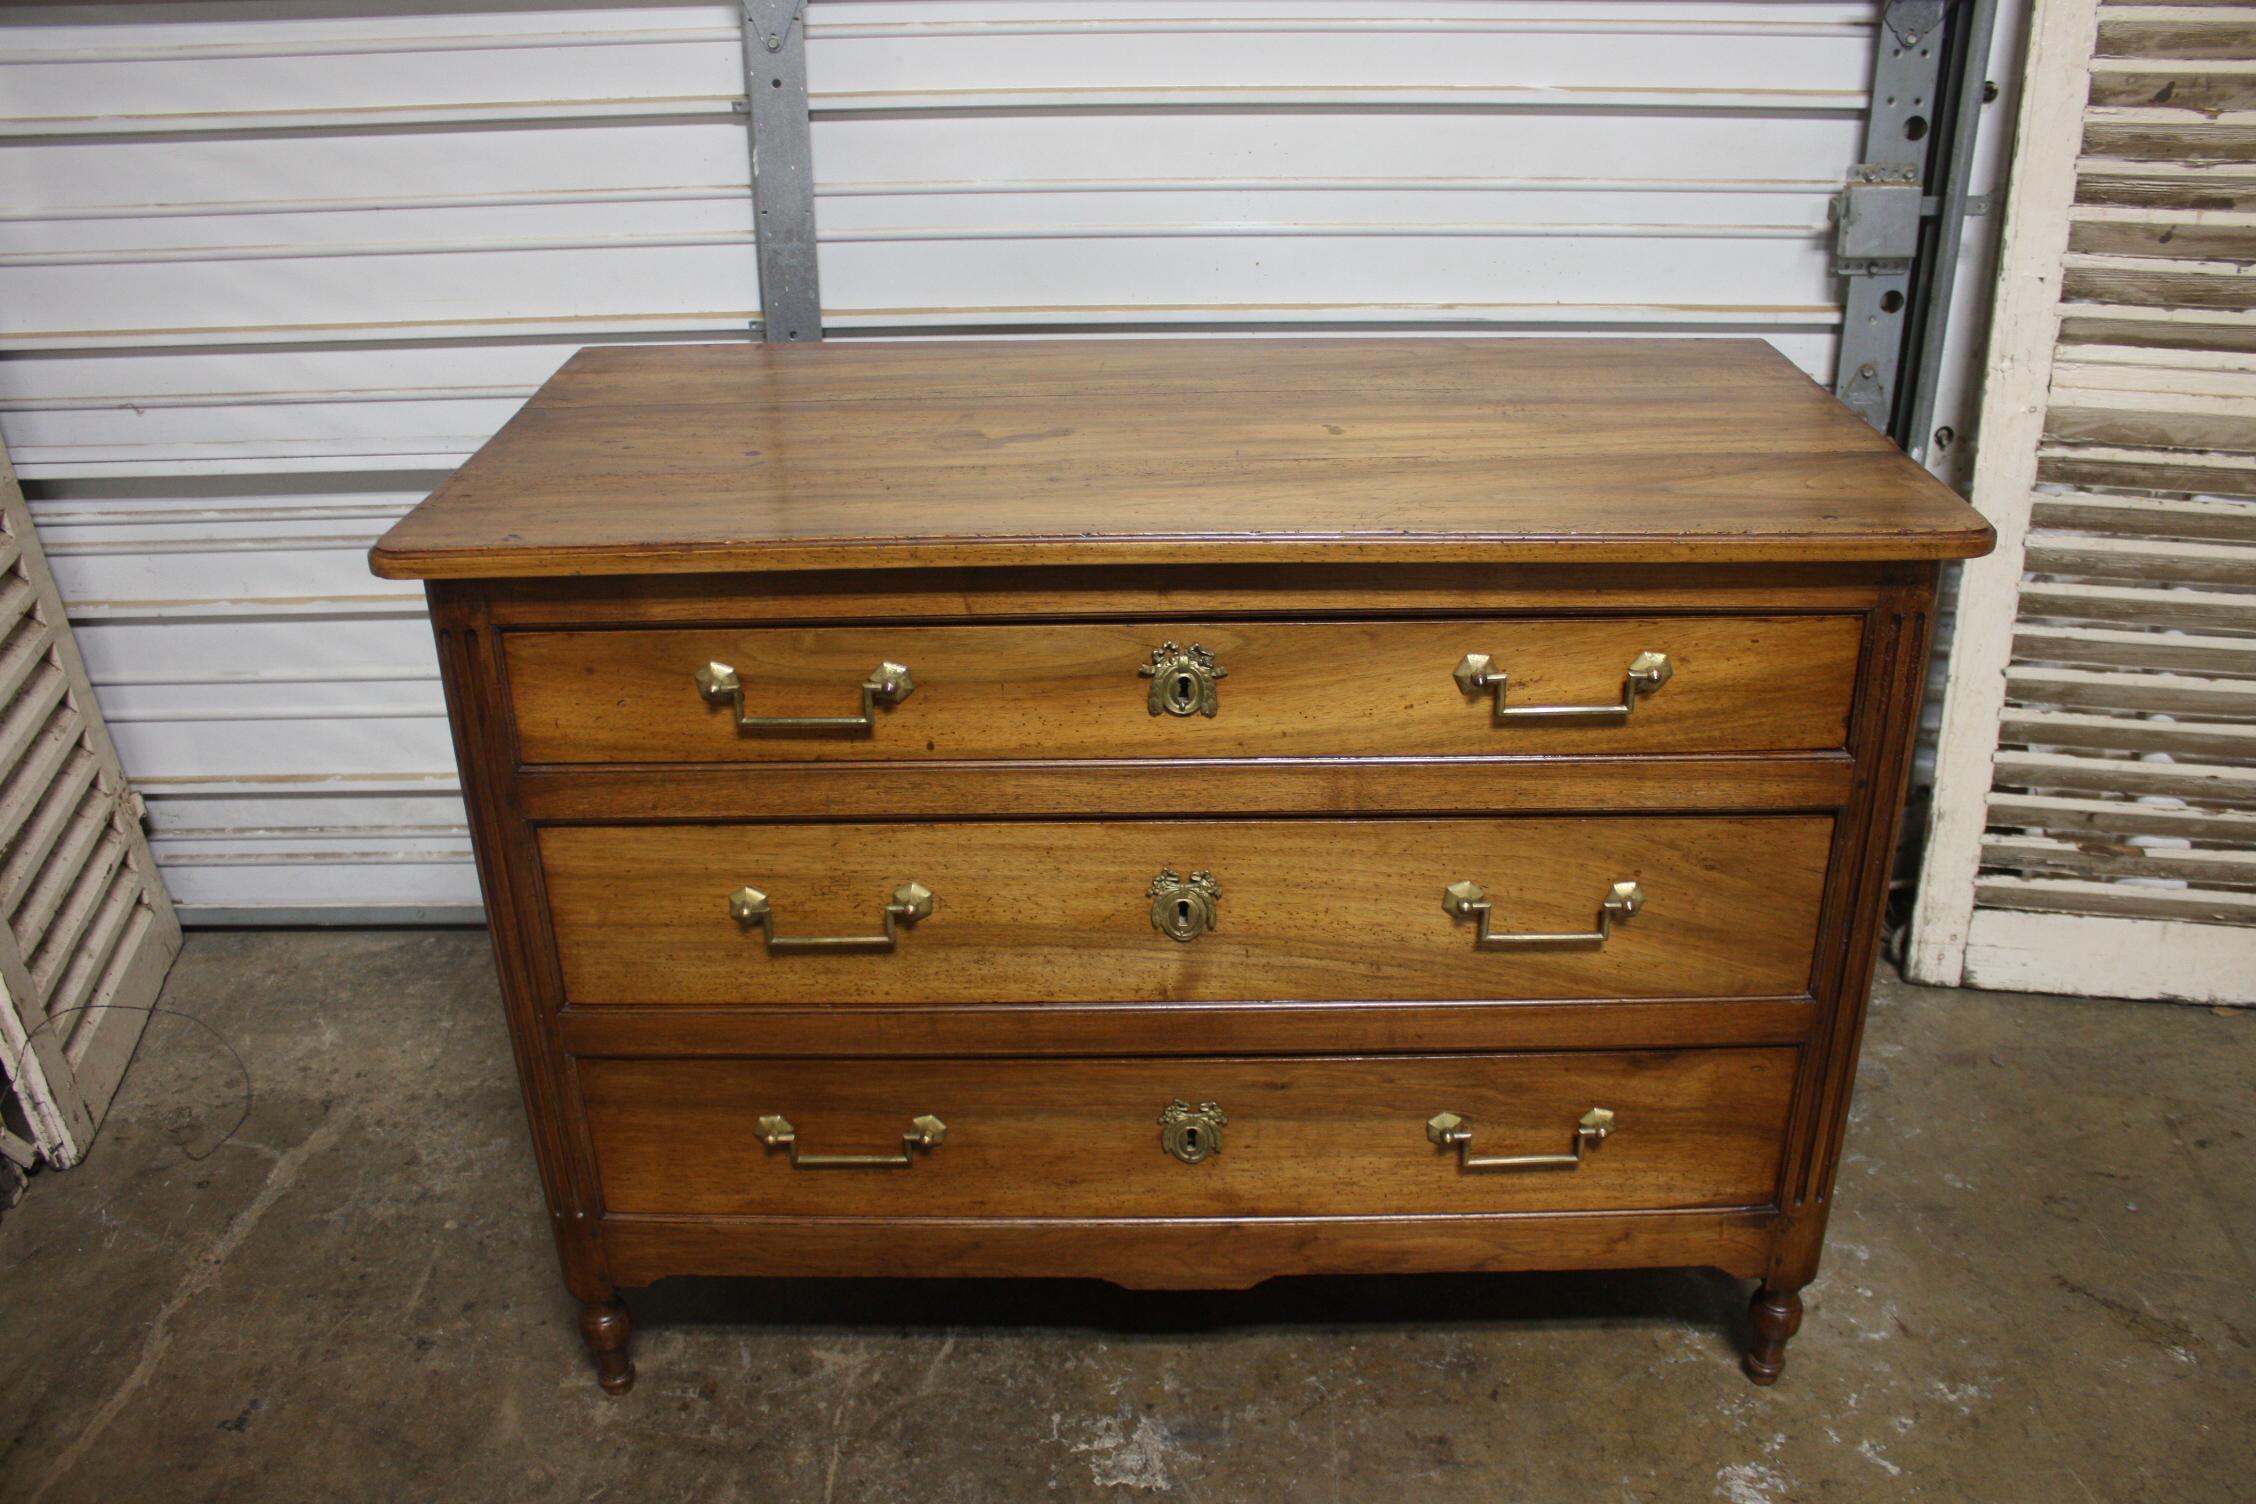 Beautiful Louis XVI Commode in walnut and hardware. it can be mixed easily with modern furniture.